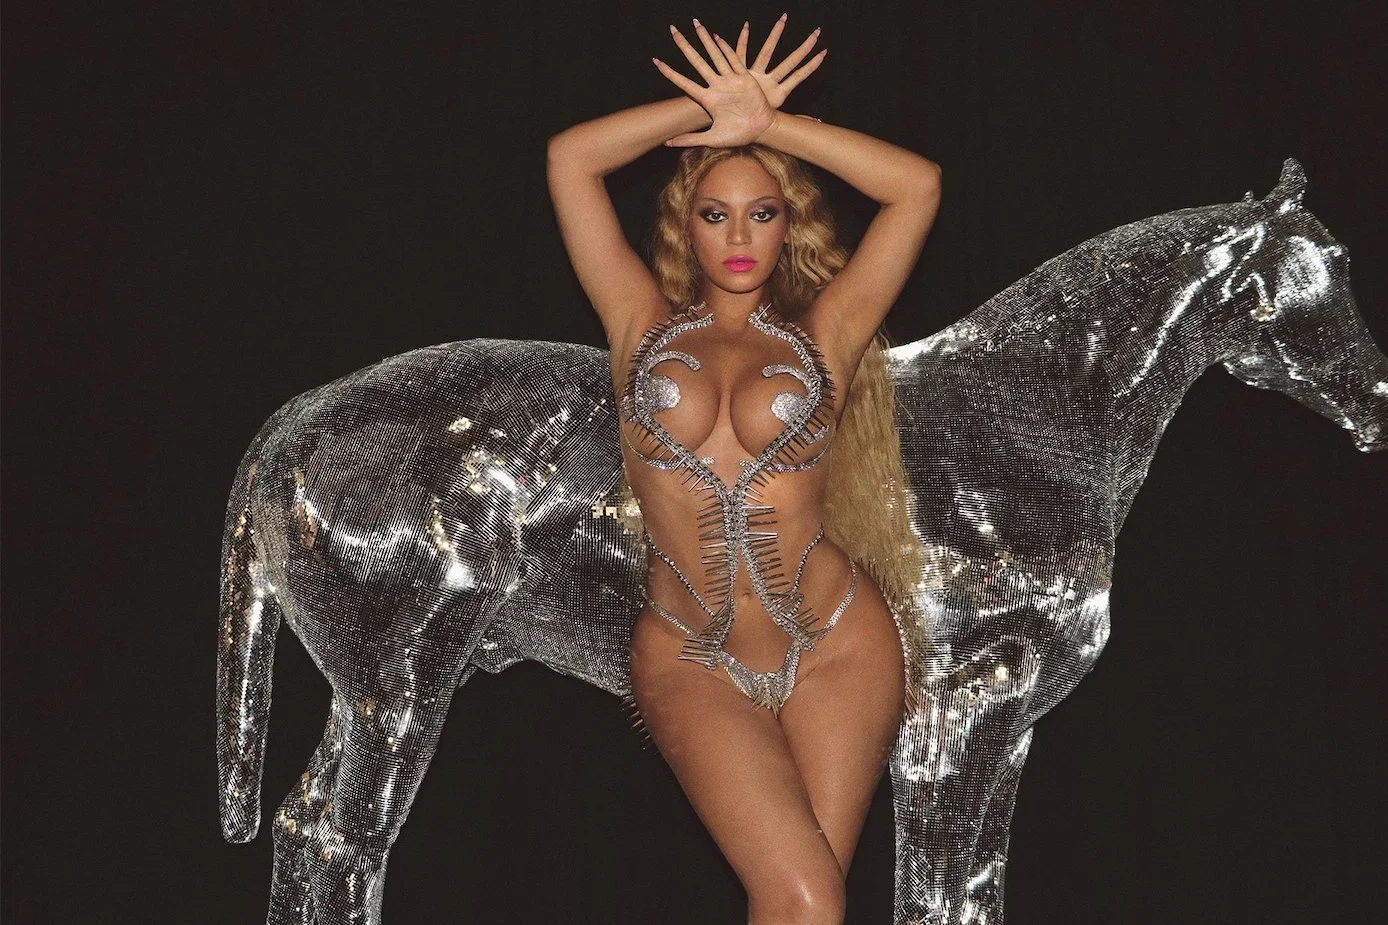 The singer poses in front of a black background and what looks like a horse made out of a disco ball. Her hands are over her head, and she wears a sort of barely-there metal-and-jewels bikini.